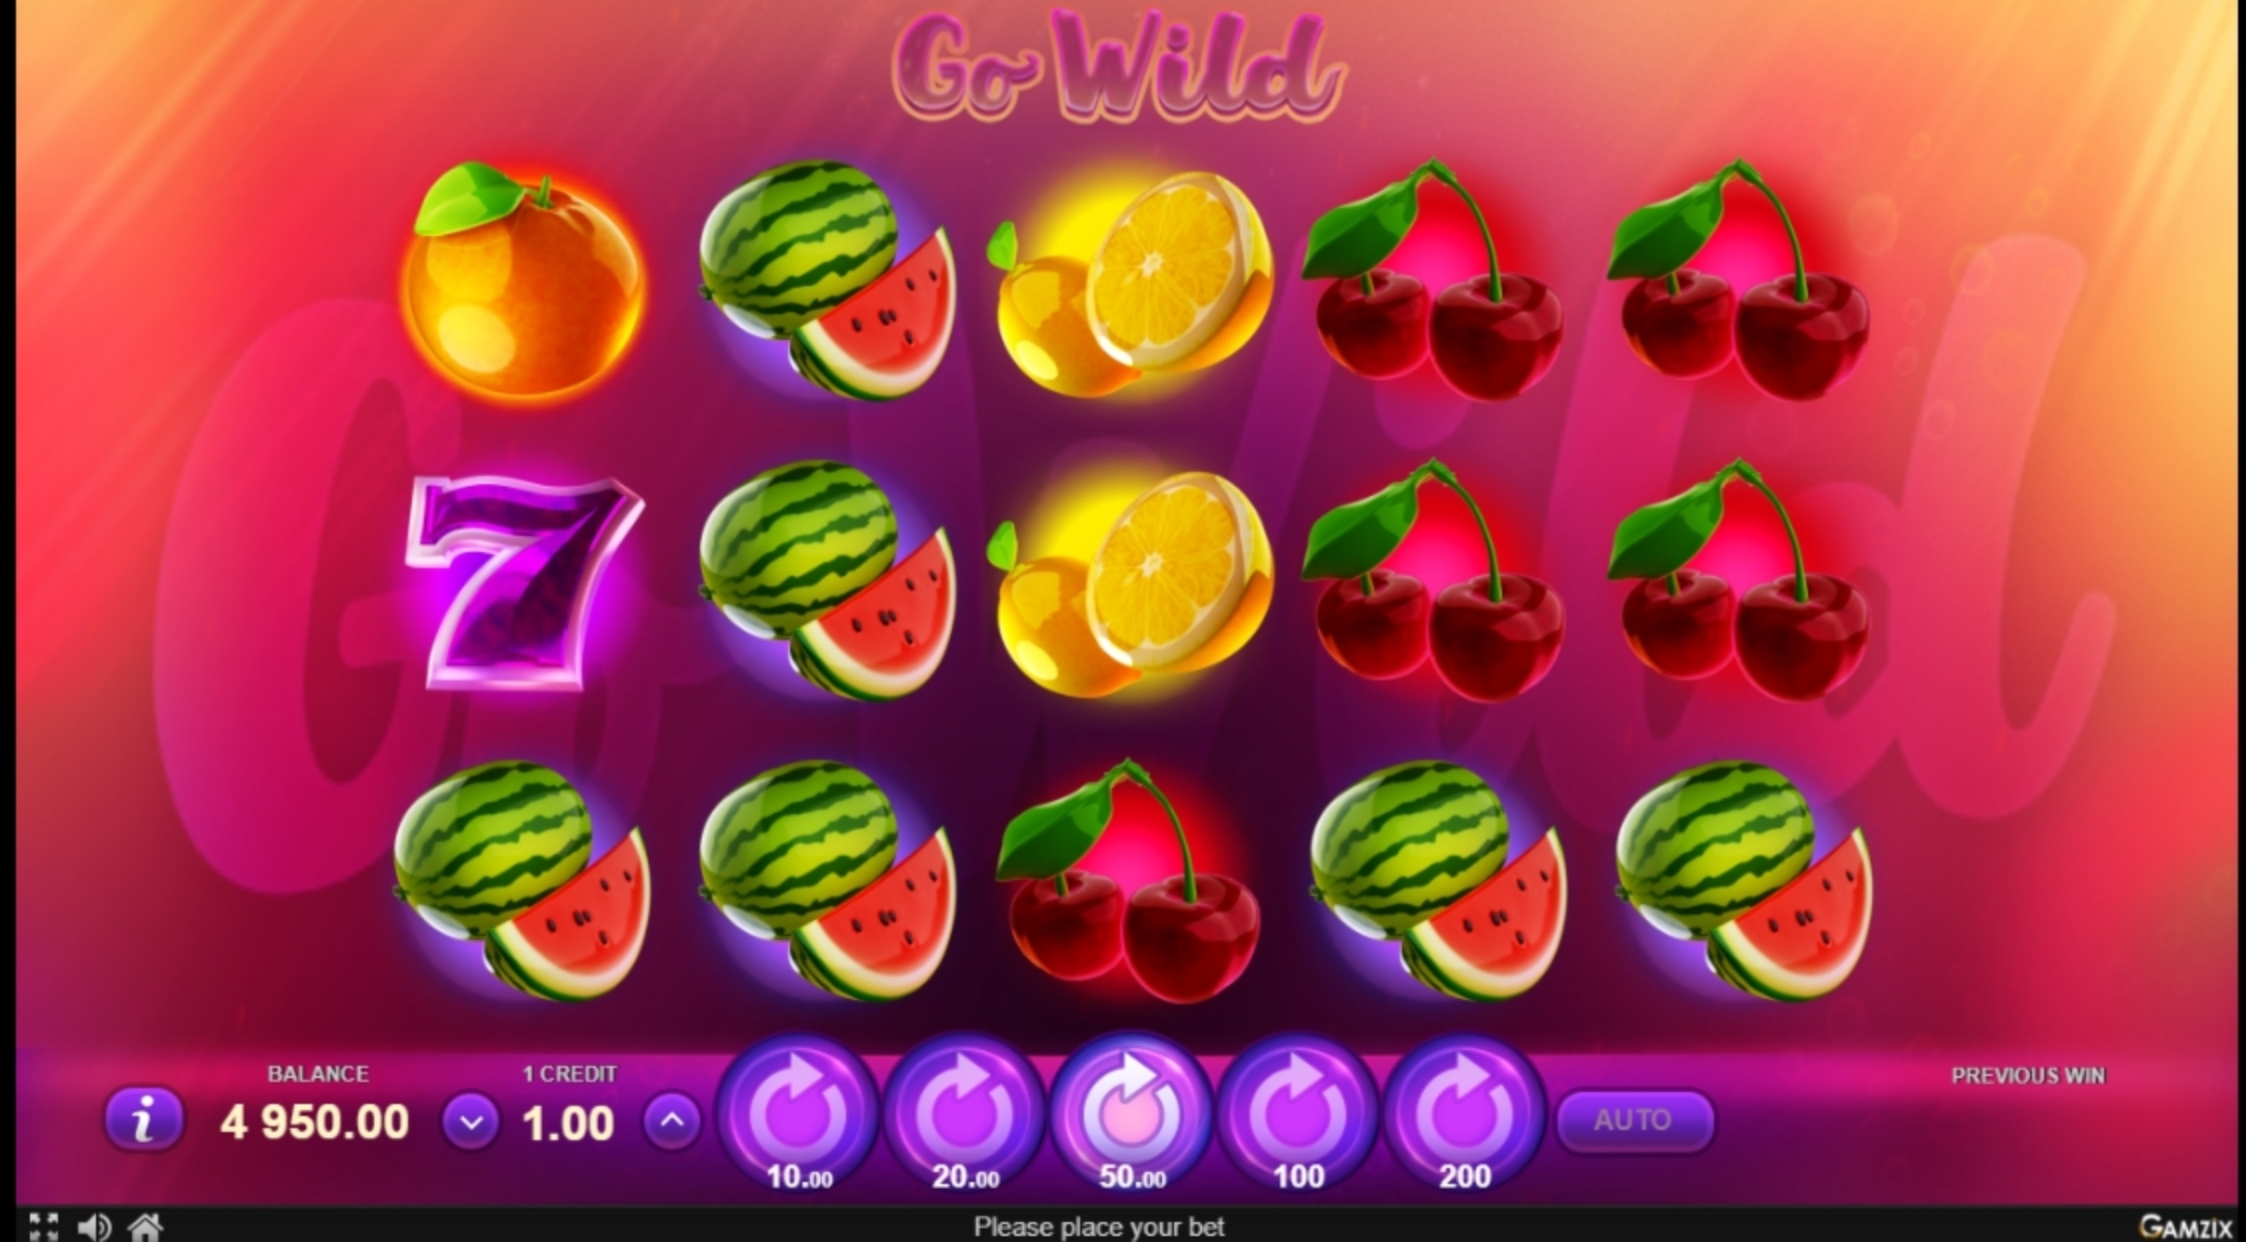 Info of Go Wild Slot Game by Gamzix